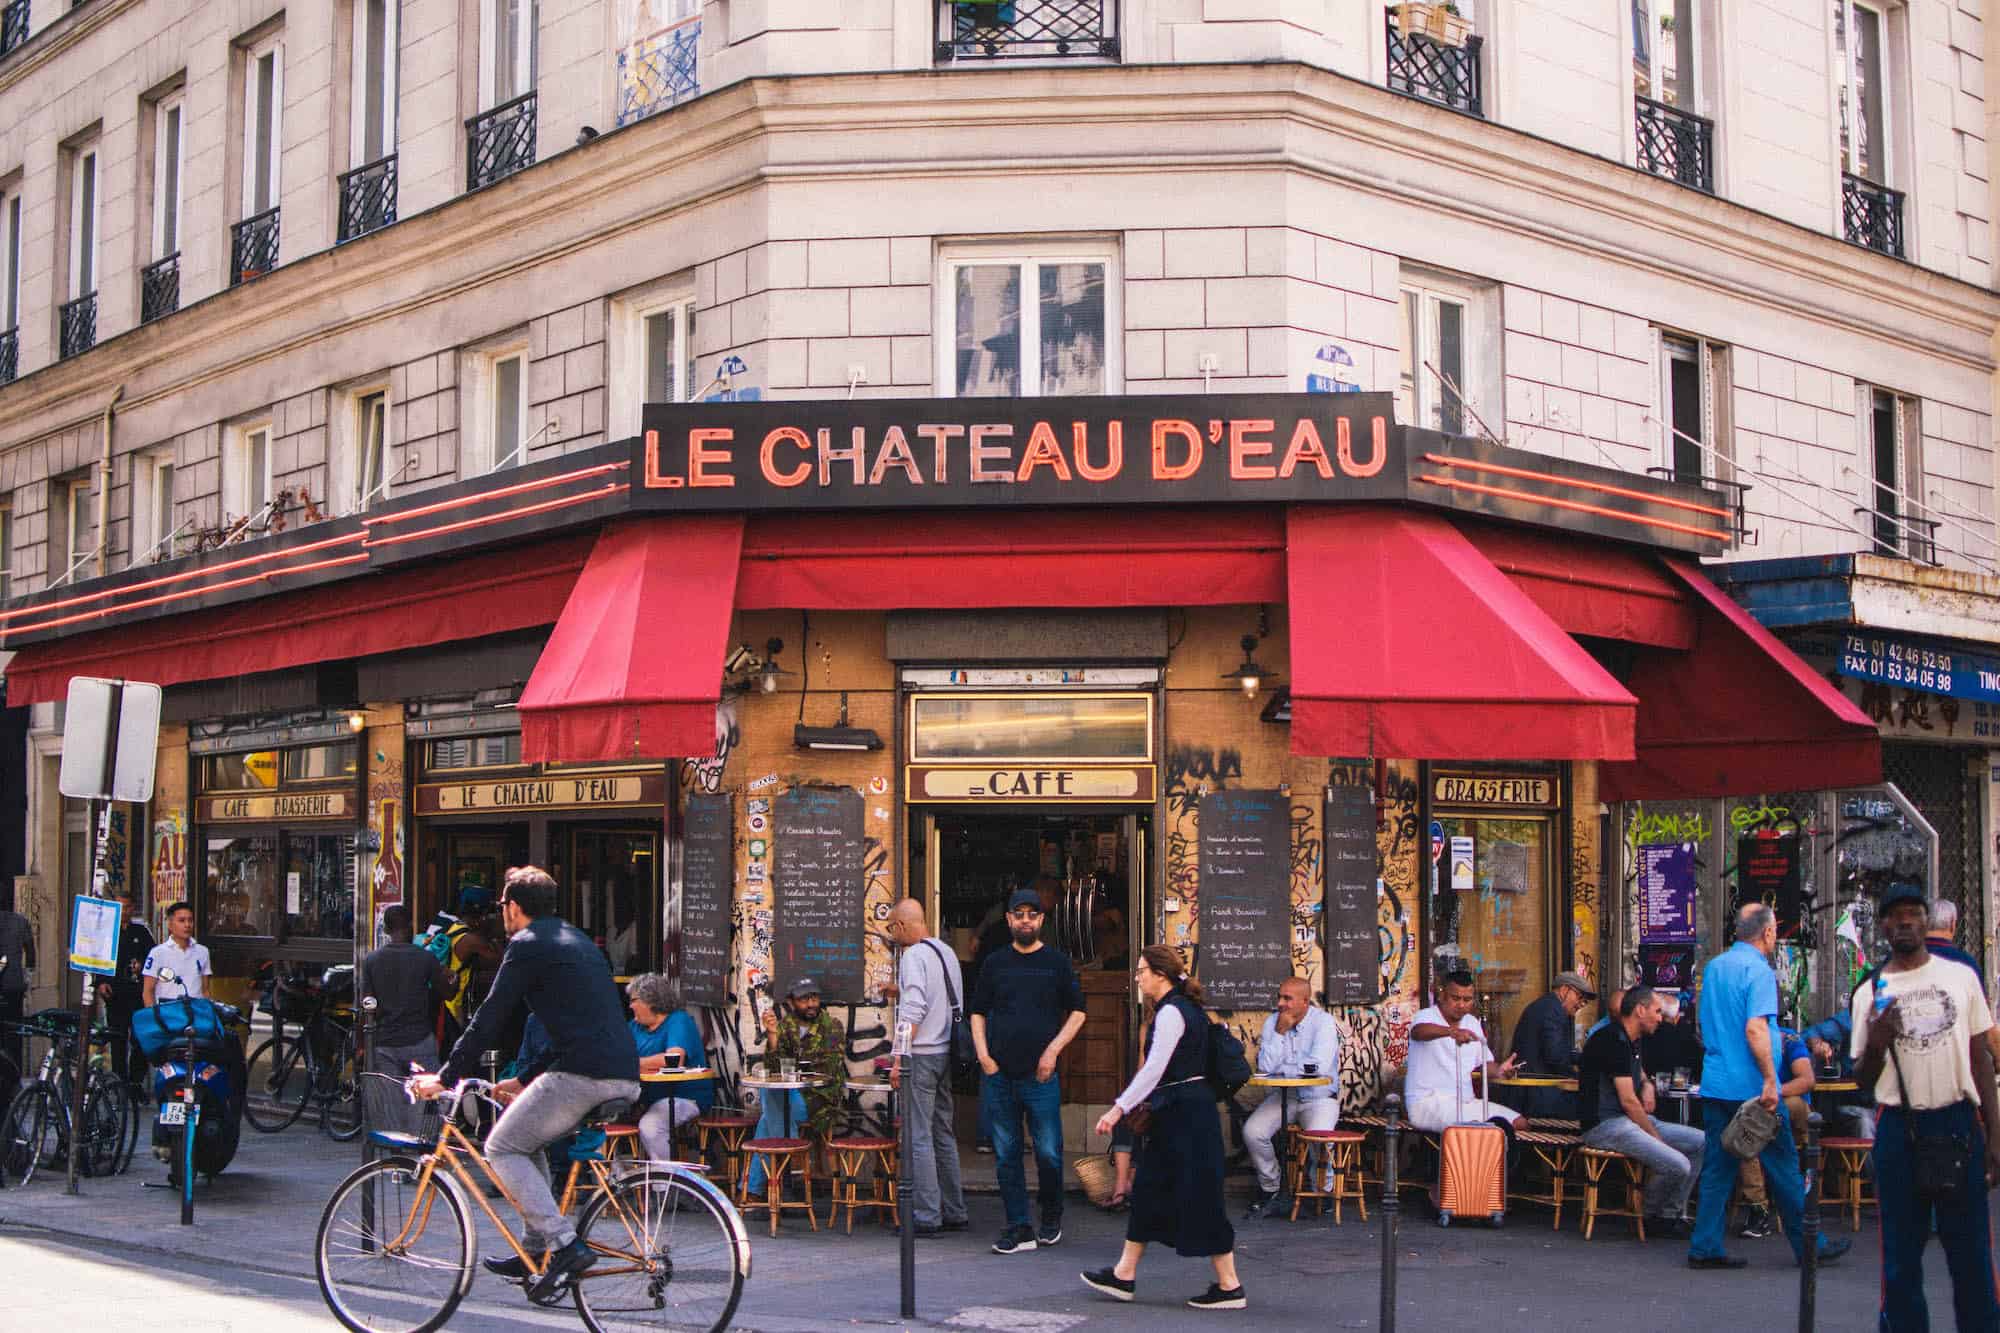 Outside a typical Parisian bistro called 'Le Chateau d'Eau' with a red awning and people sitting at tables outside.